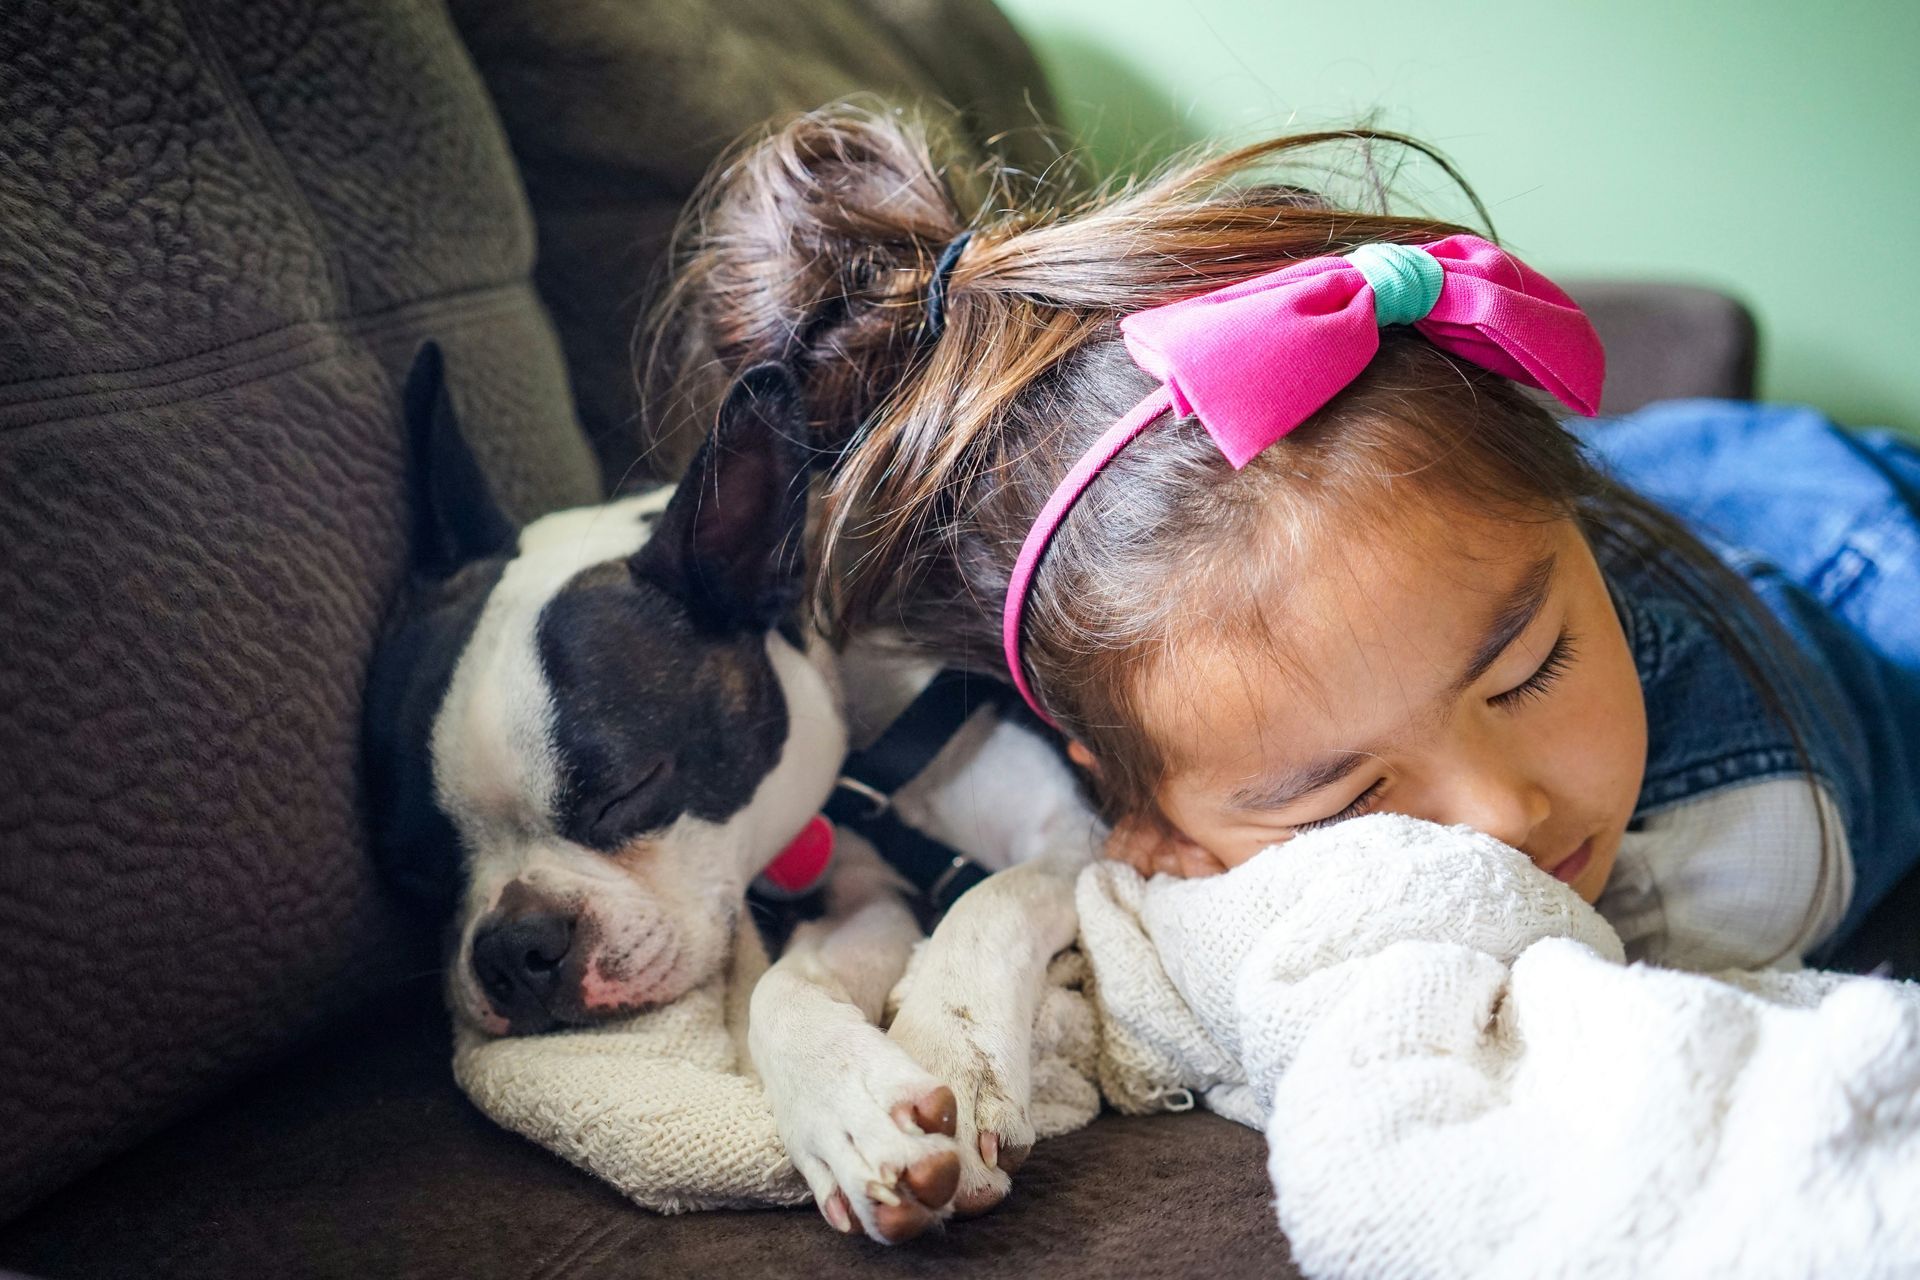 A little girl is laying on a couch with a puppy.